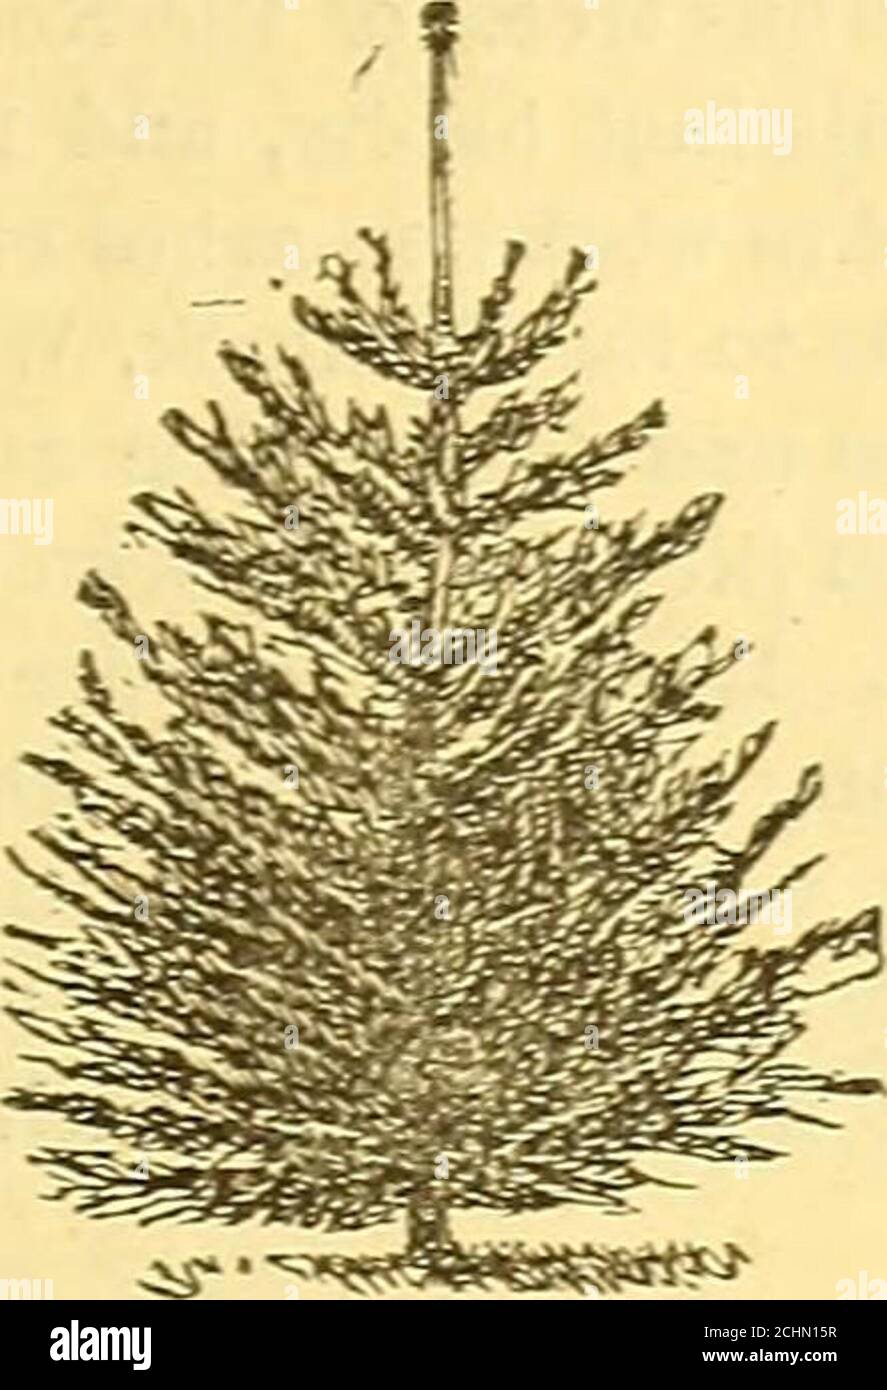 . Reading Nursery : [catalog] 1875. . f the Japan Cypress. Per-fectly hardy, and yet .have so delicate a look thatthey may be said to be living and growing plumes. CATALOGUE OF READING NURSERY, MASS. J. W. MANNING, PROPRIETOR. 21 R. Pluraosa Aurea. Of all the Retinisporas, this weesteem the mo^t useful and beautiful. It resemblesa golden plume, and has stood a Massachusetts cli-mate several years in our grounds. No large treesare offered. Price $1 to $2. R. Filifera. Fern-like Retinispora. A beautiful form,with delicate slender branchlets. Leaves small, verysharp-pointed, deep glossy green abo Stock Photo